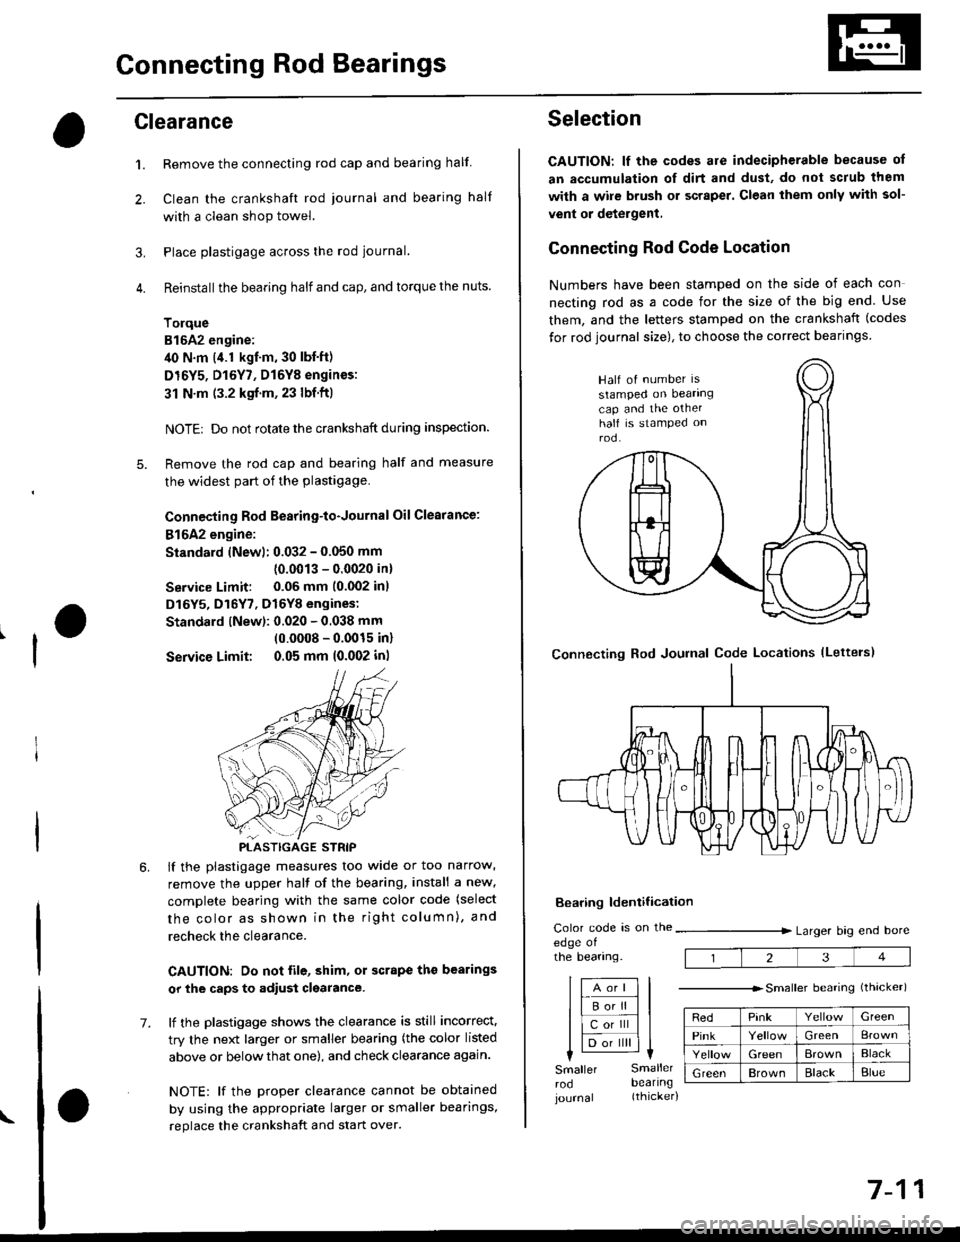 HONDA CIVIC 1996 6.G Owners Guide Connecting Rod Bearings
Clearance
Remove the connecting rod cap and bearing half
Clean the crankshaft rod iournal and bearing half
with a clean shop towel.
Place plastigage across the rod journal.
Rei